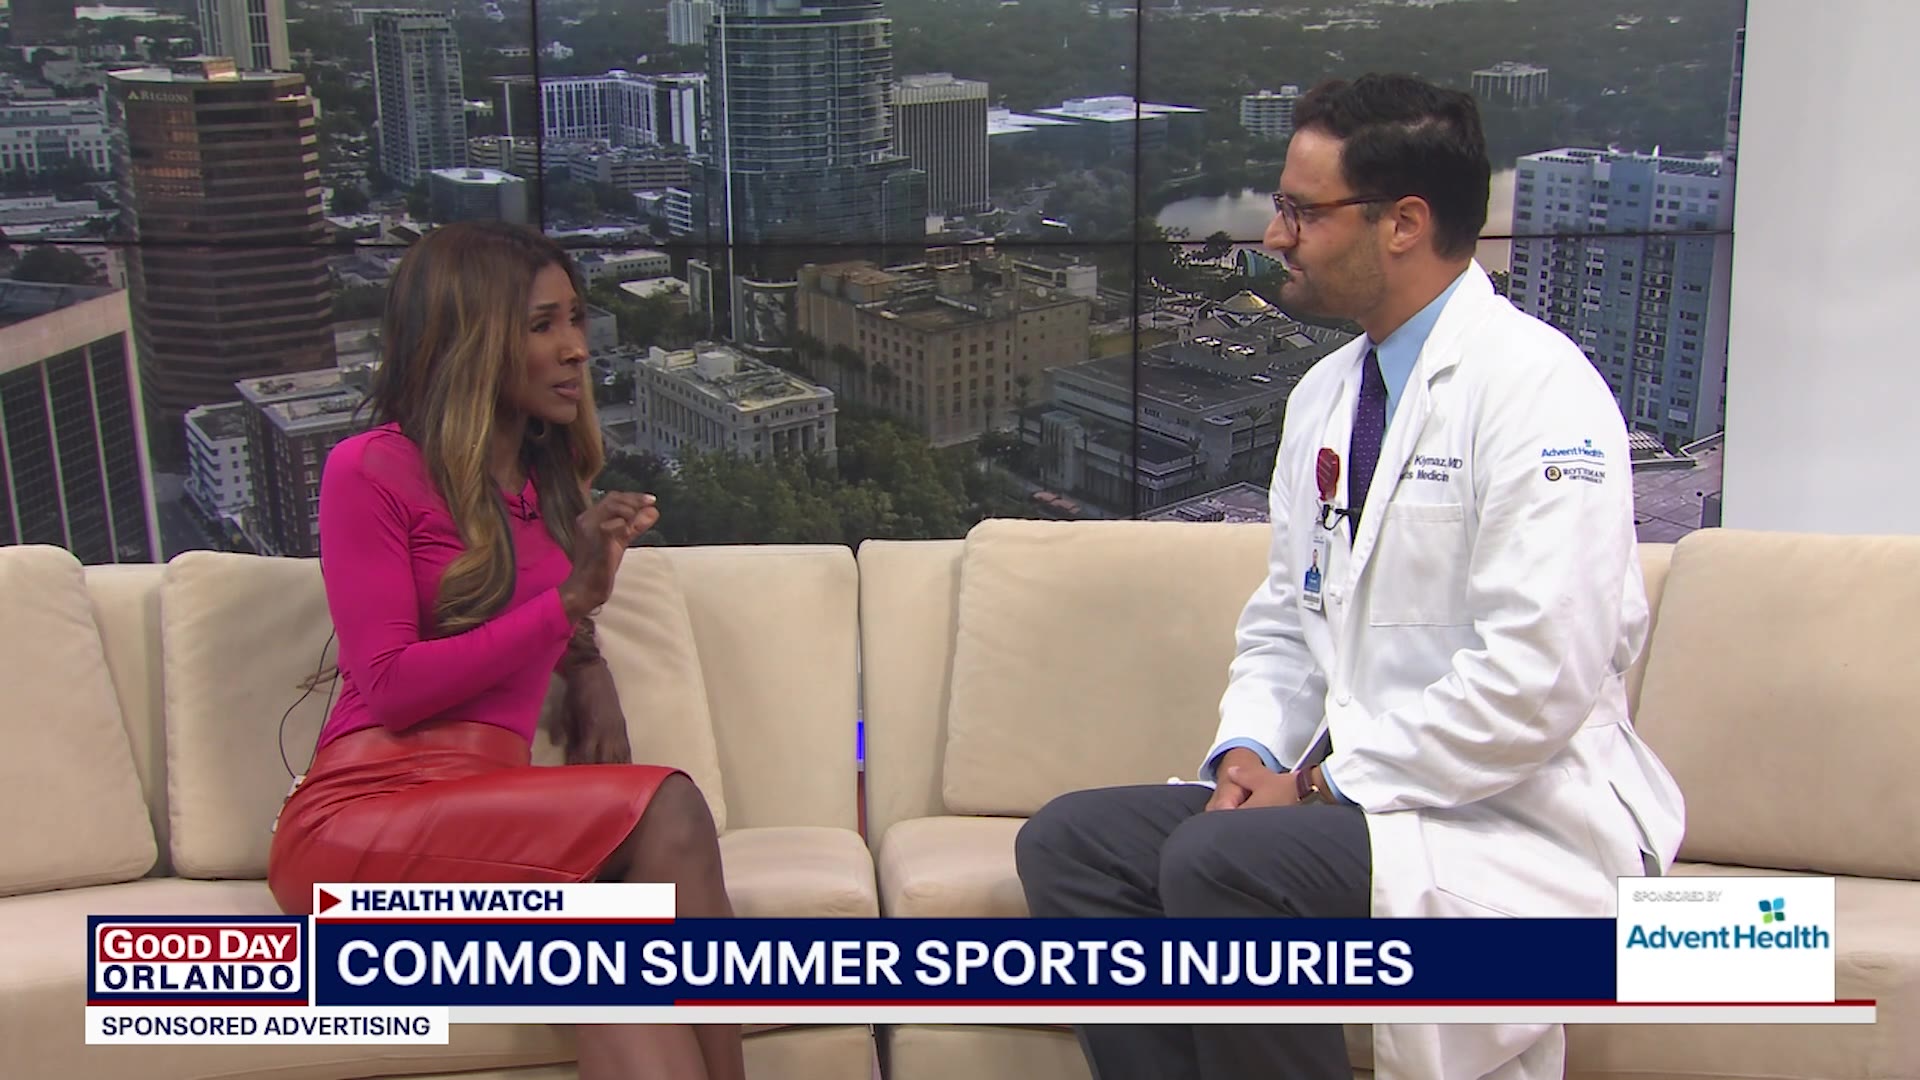 House Calls: The most common summertime injuries